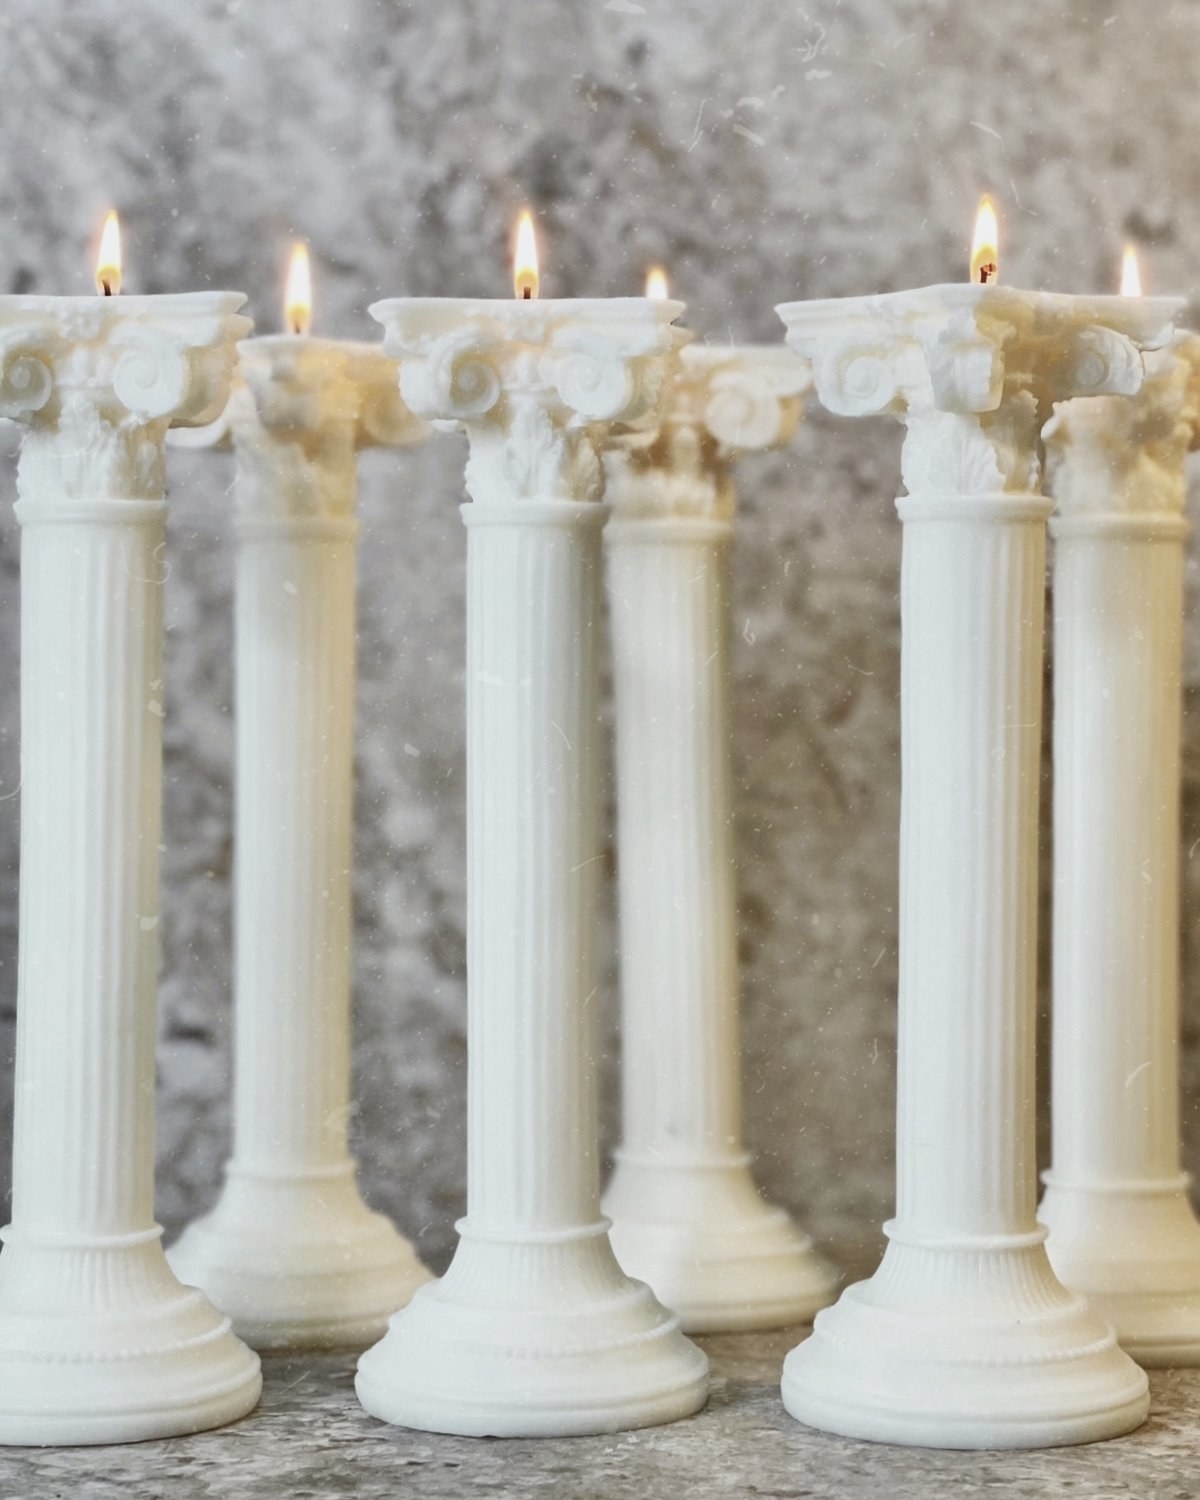 six of the white roman column candles